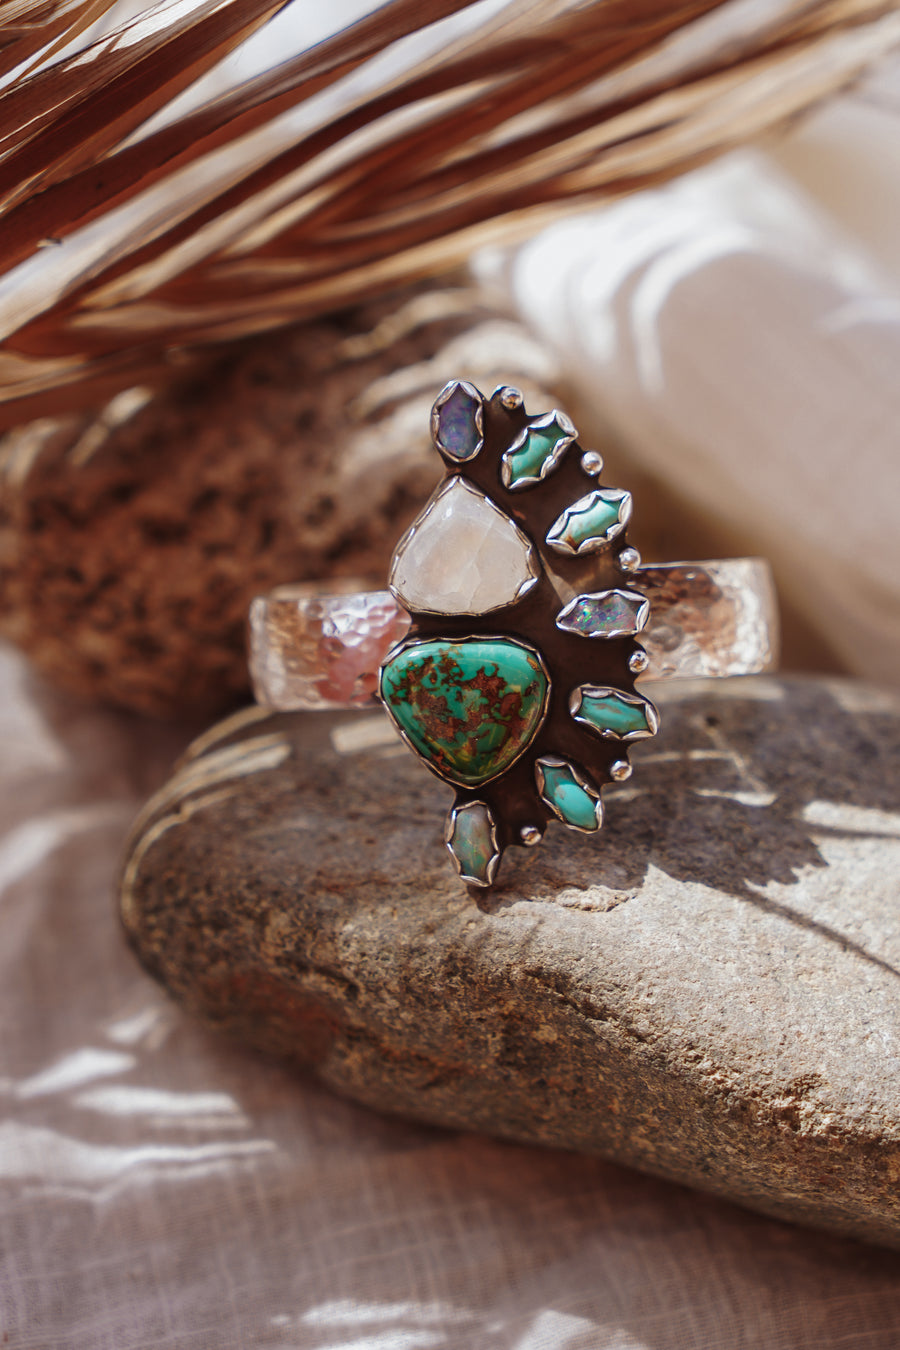 Statement Cuff in Rainbow Moonstone, Boulder Opal Doublets, Campitos, & Kingman Turquoise